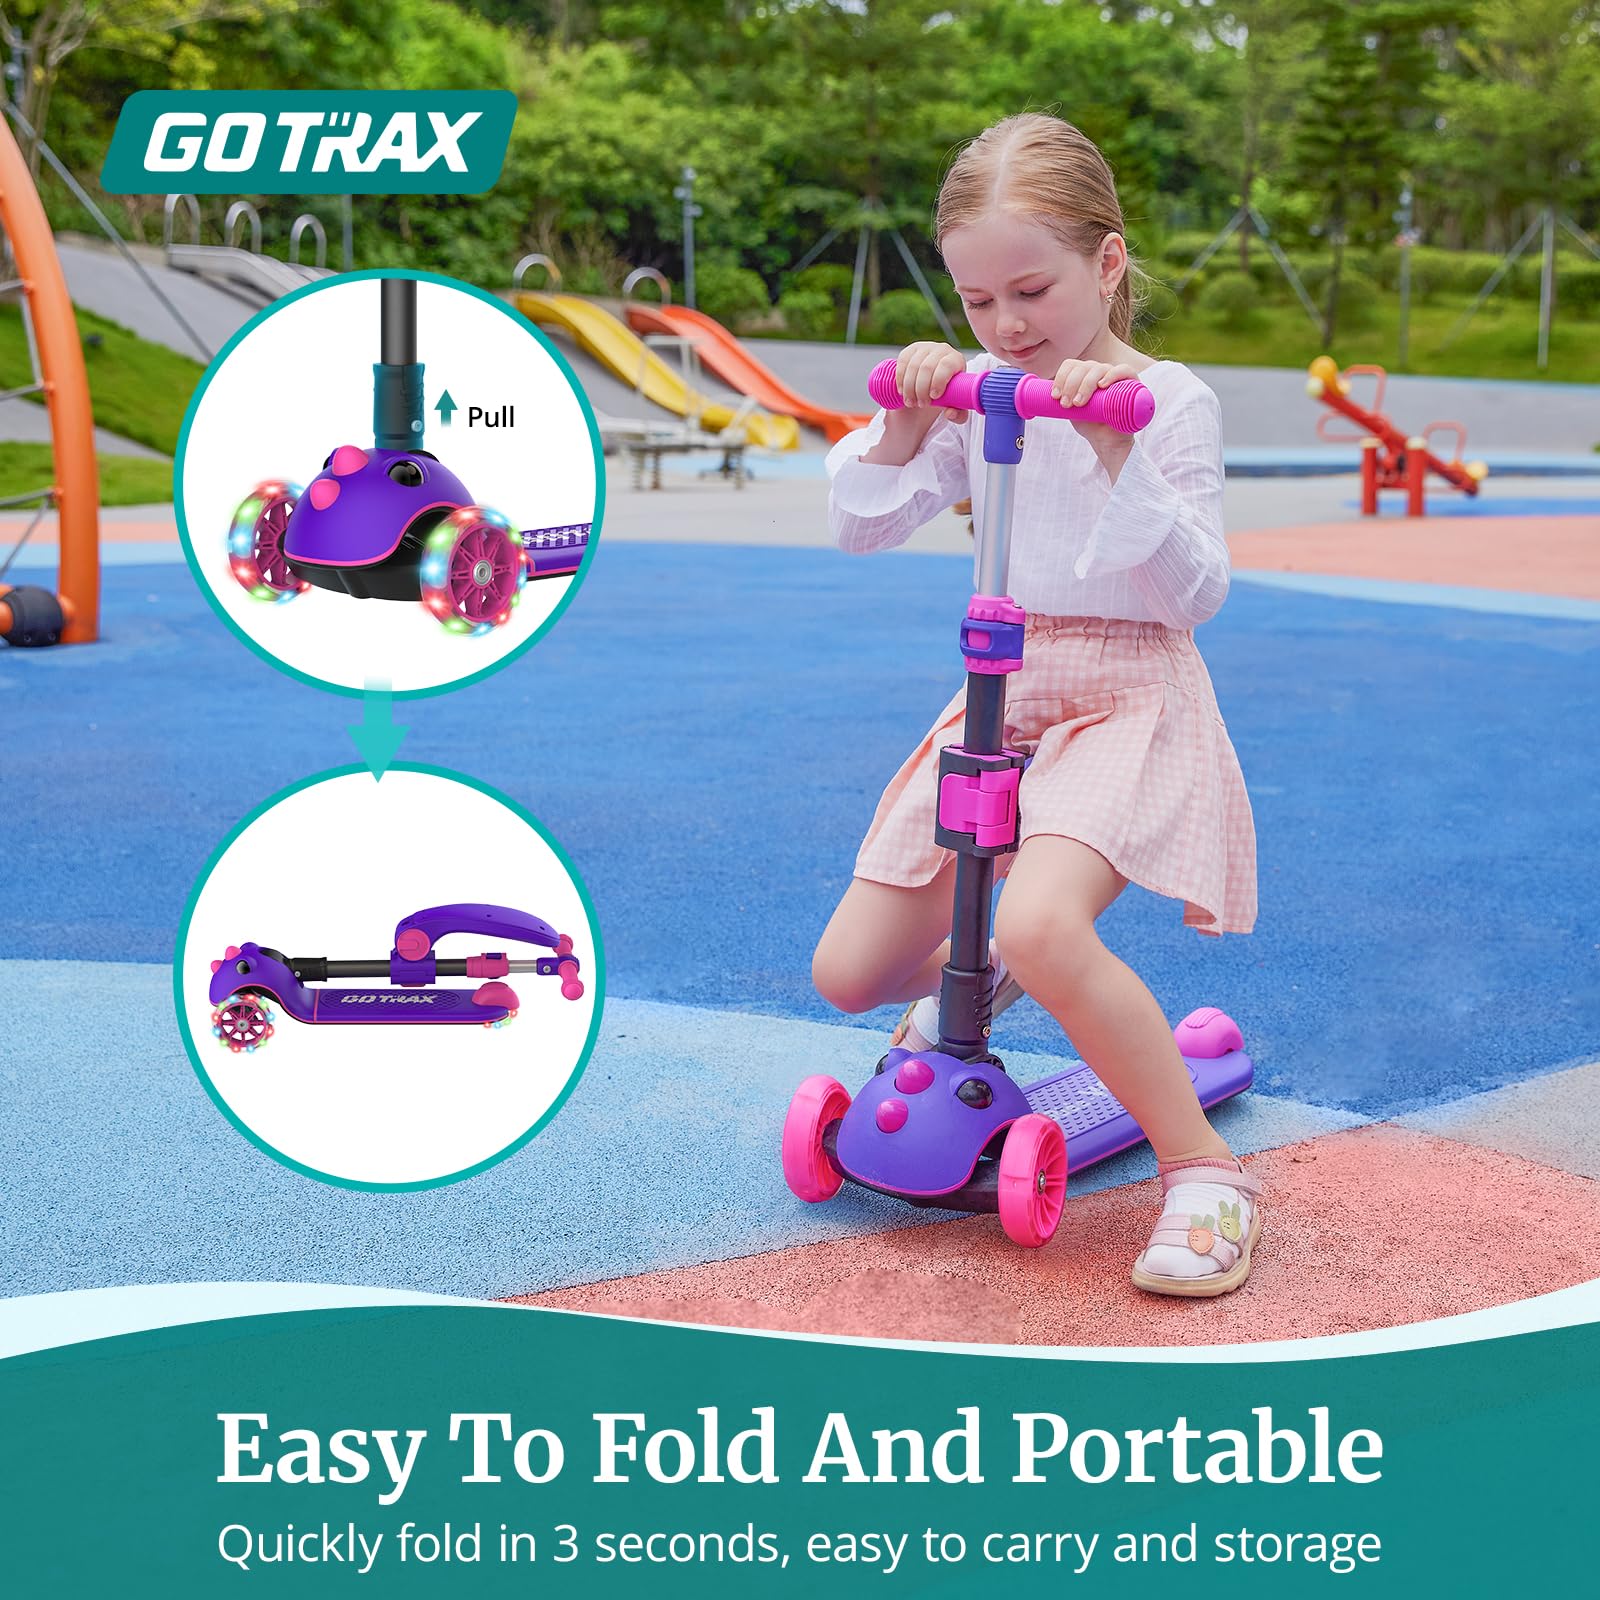 Gotrax KS3 Pro Kick Scooter for Kids, One Key Removable Seat & 3 Extra Wide PU Light-Up Wheels and Anti-Slip Deck, Adjustable Height Handlebar and Lean-to-Steer, Foldable Scooter for Children Aged 2-8